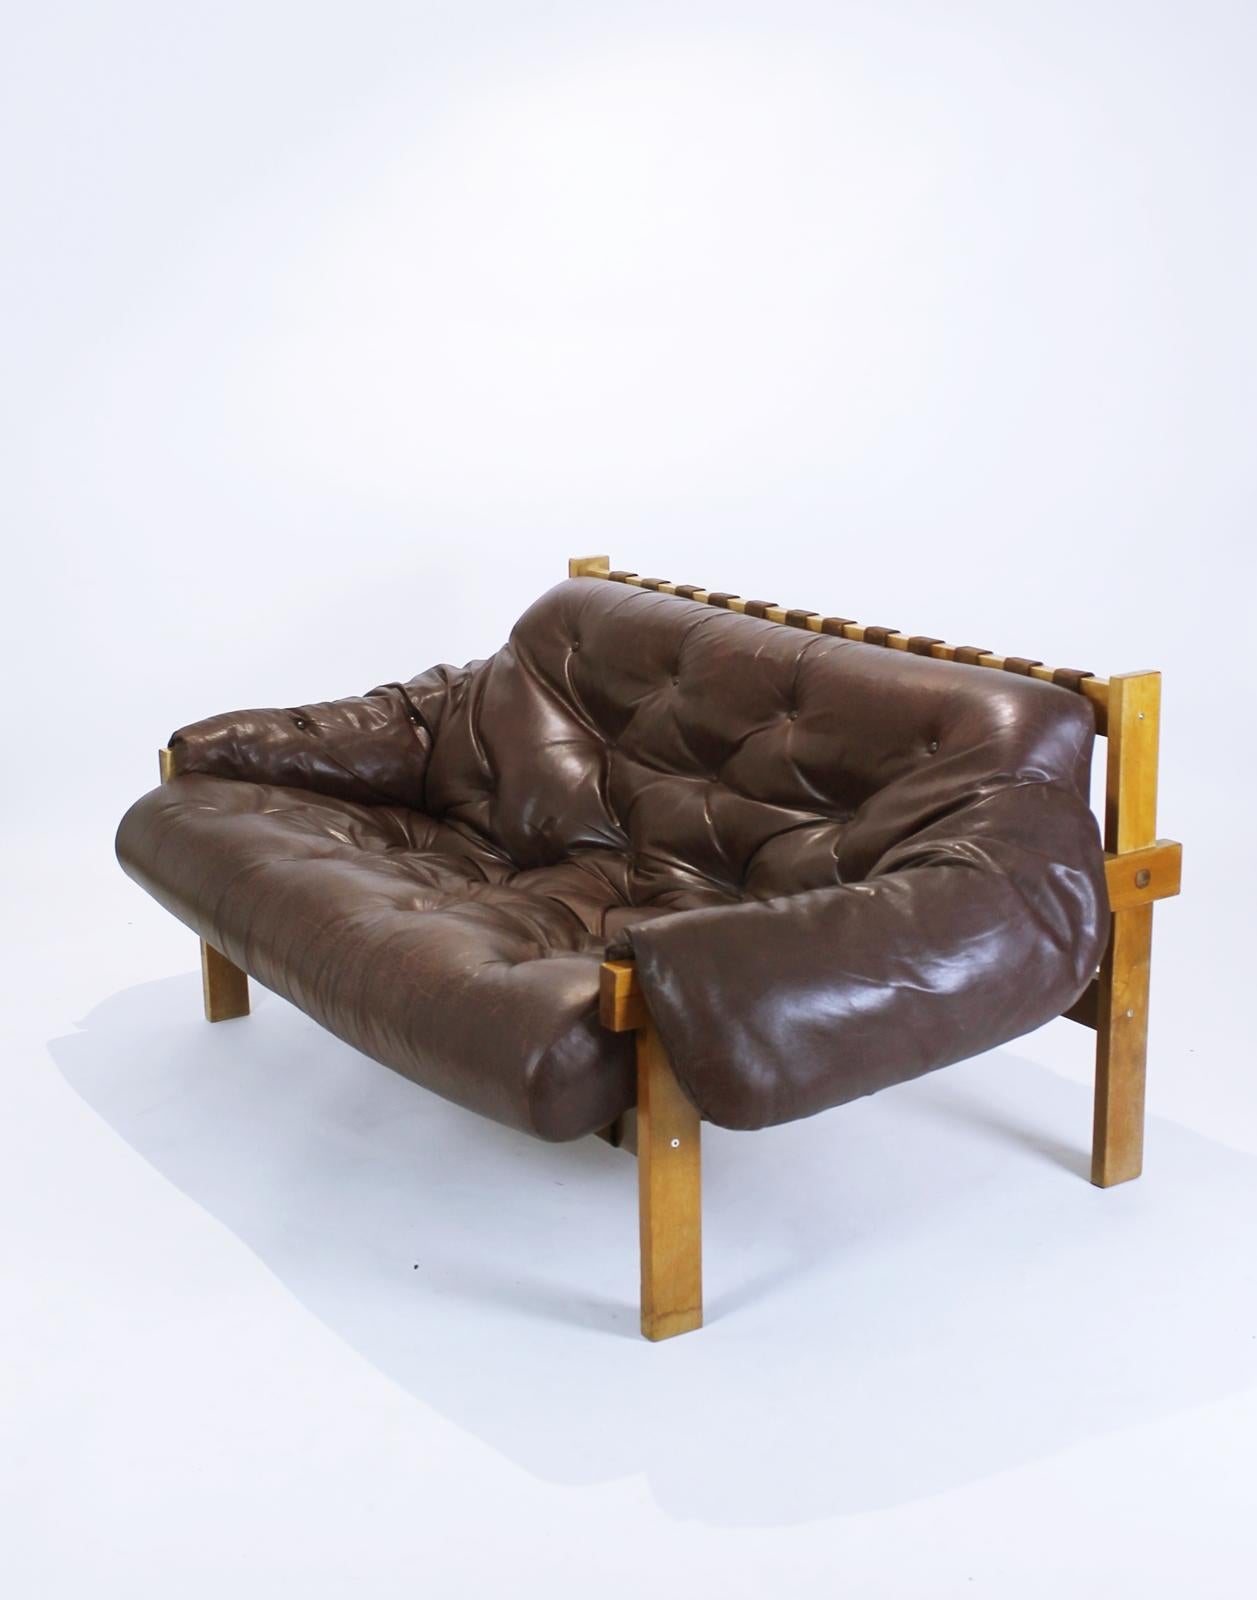 Wonderfully distressed brown leather sofa in manner of Brazilian designer Percival Lafer. Featuring a solid wood frame with beautiful grain that supports the natural leather straps which the tufted brown leather cushion rests on. The original